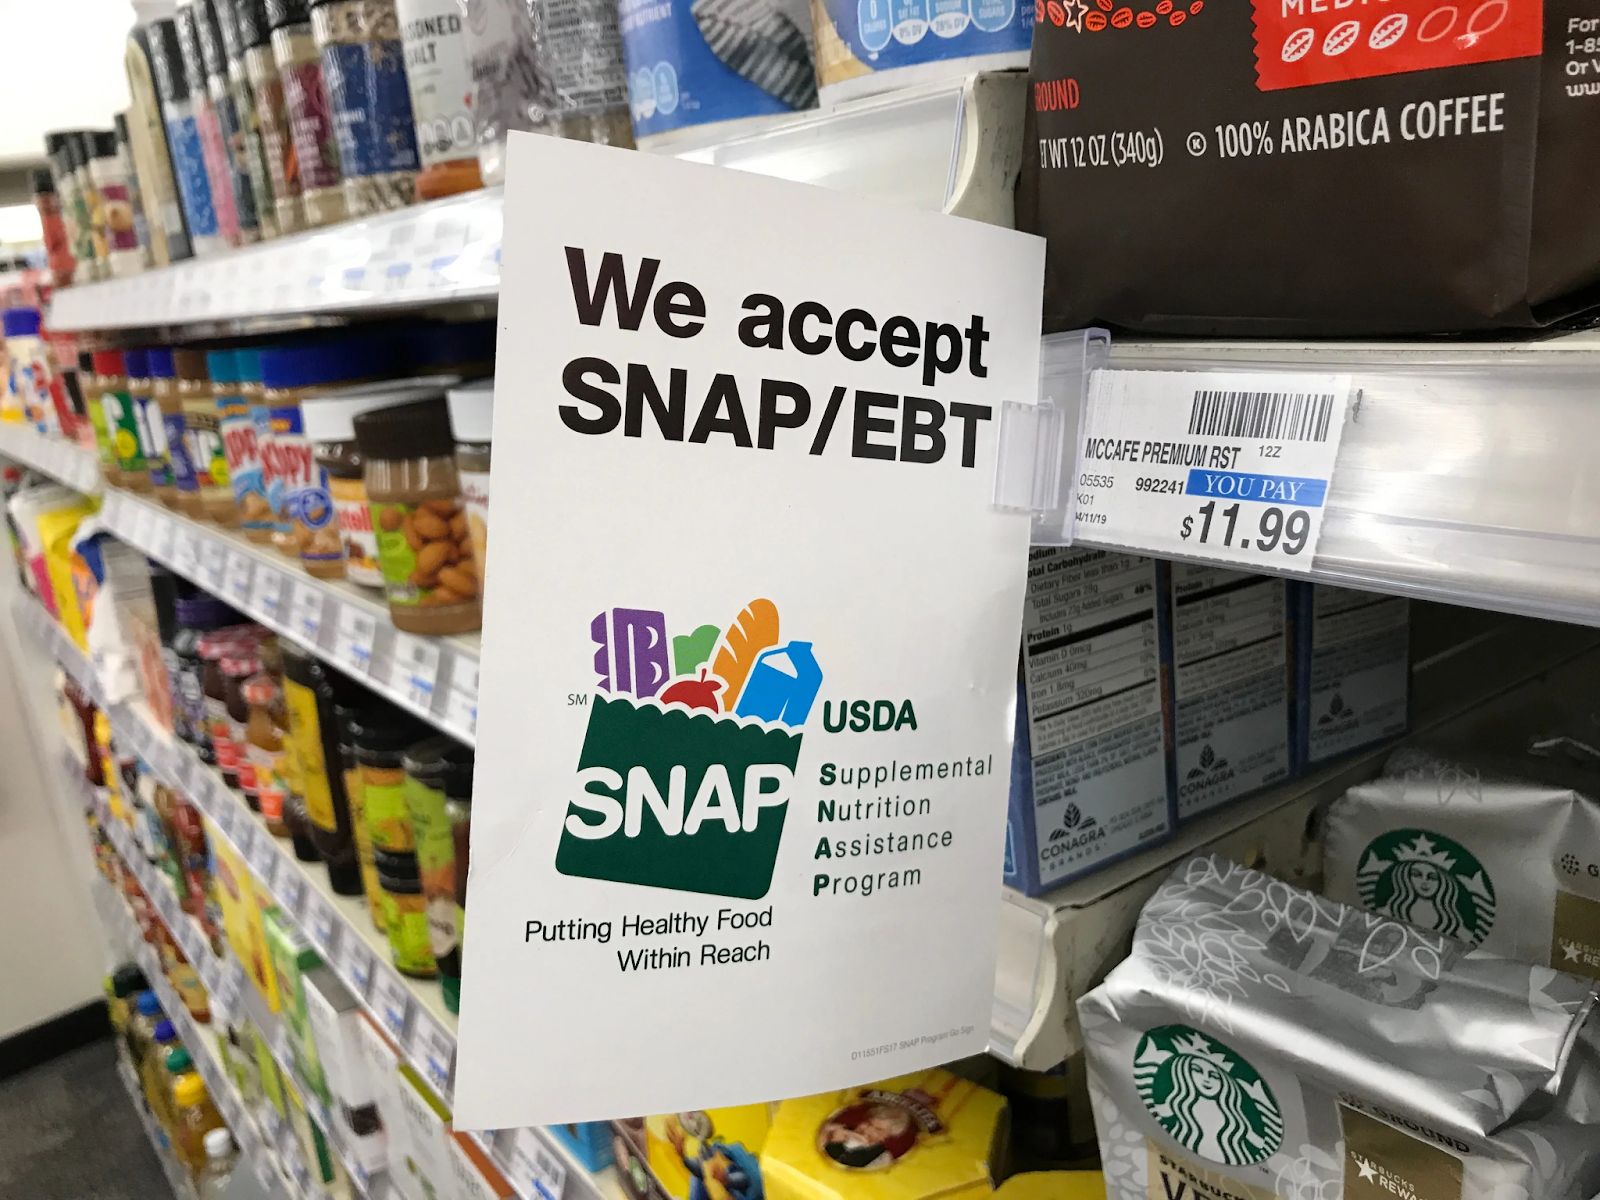 Find Out How to Apply and Who Can Receive SNAP Benefits Through the App (Oh SNAP)